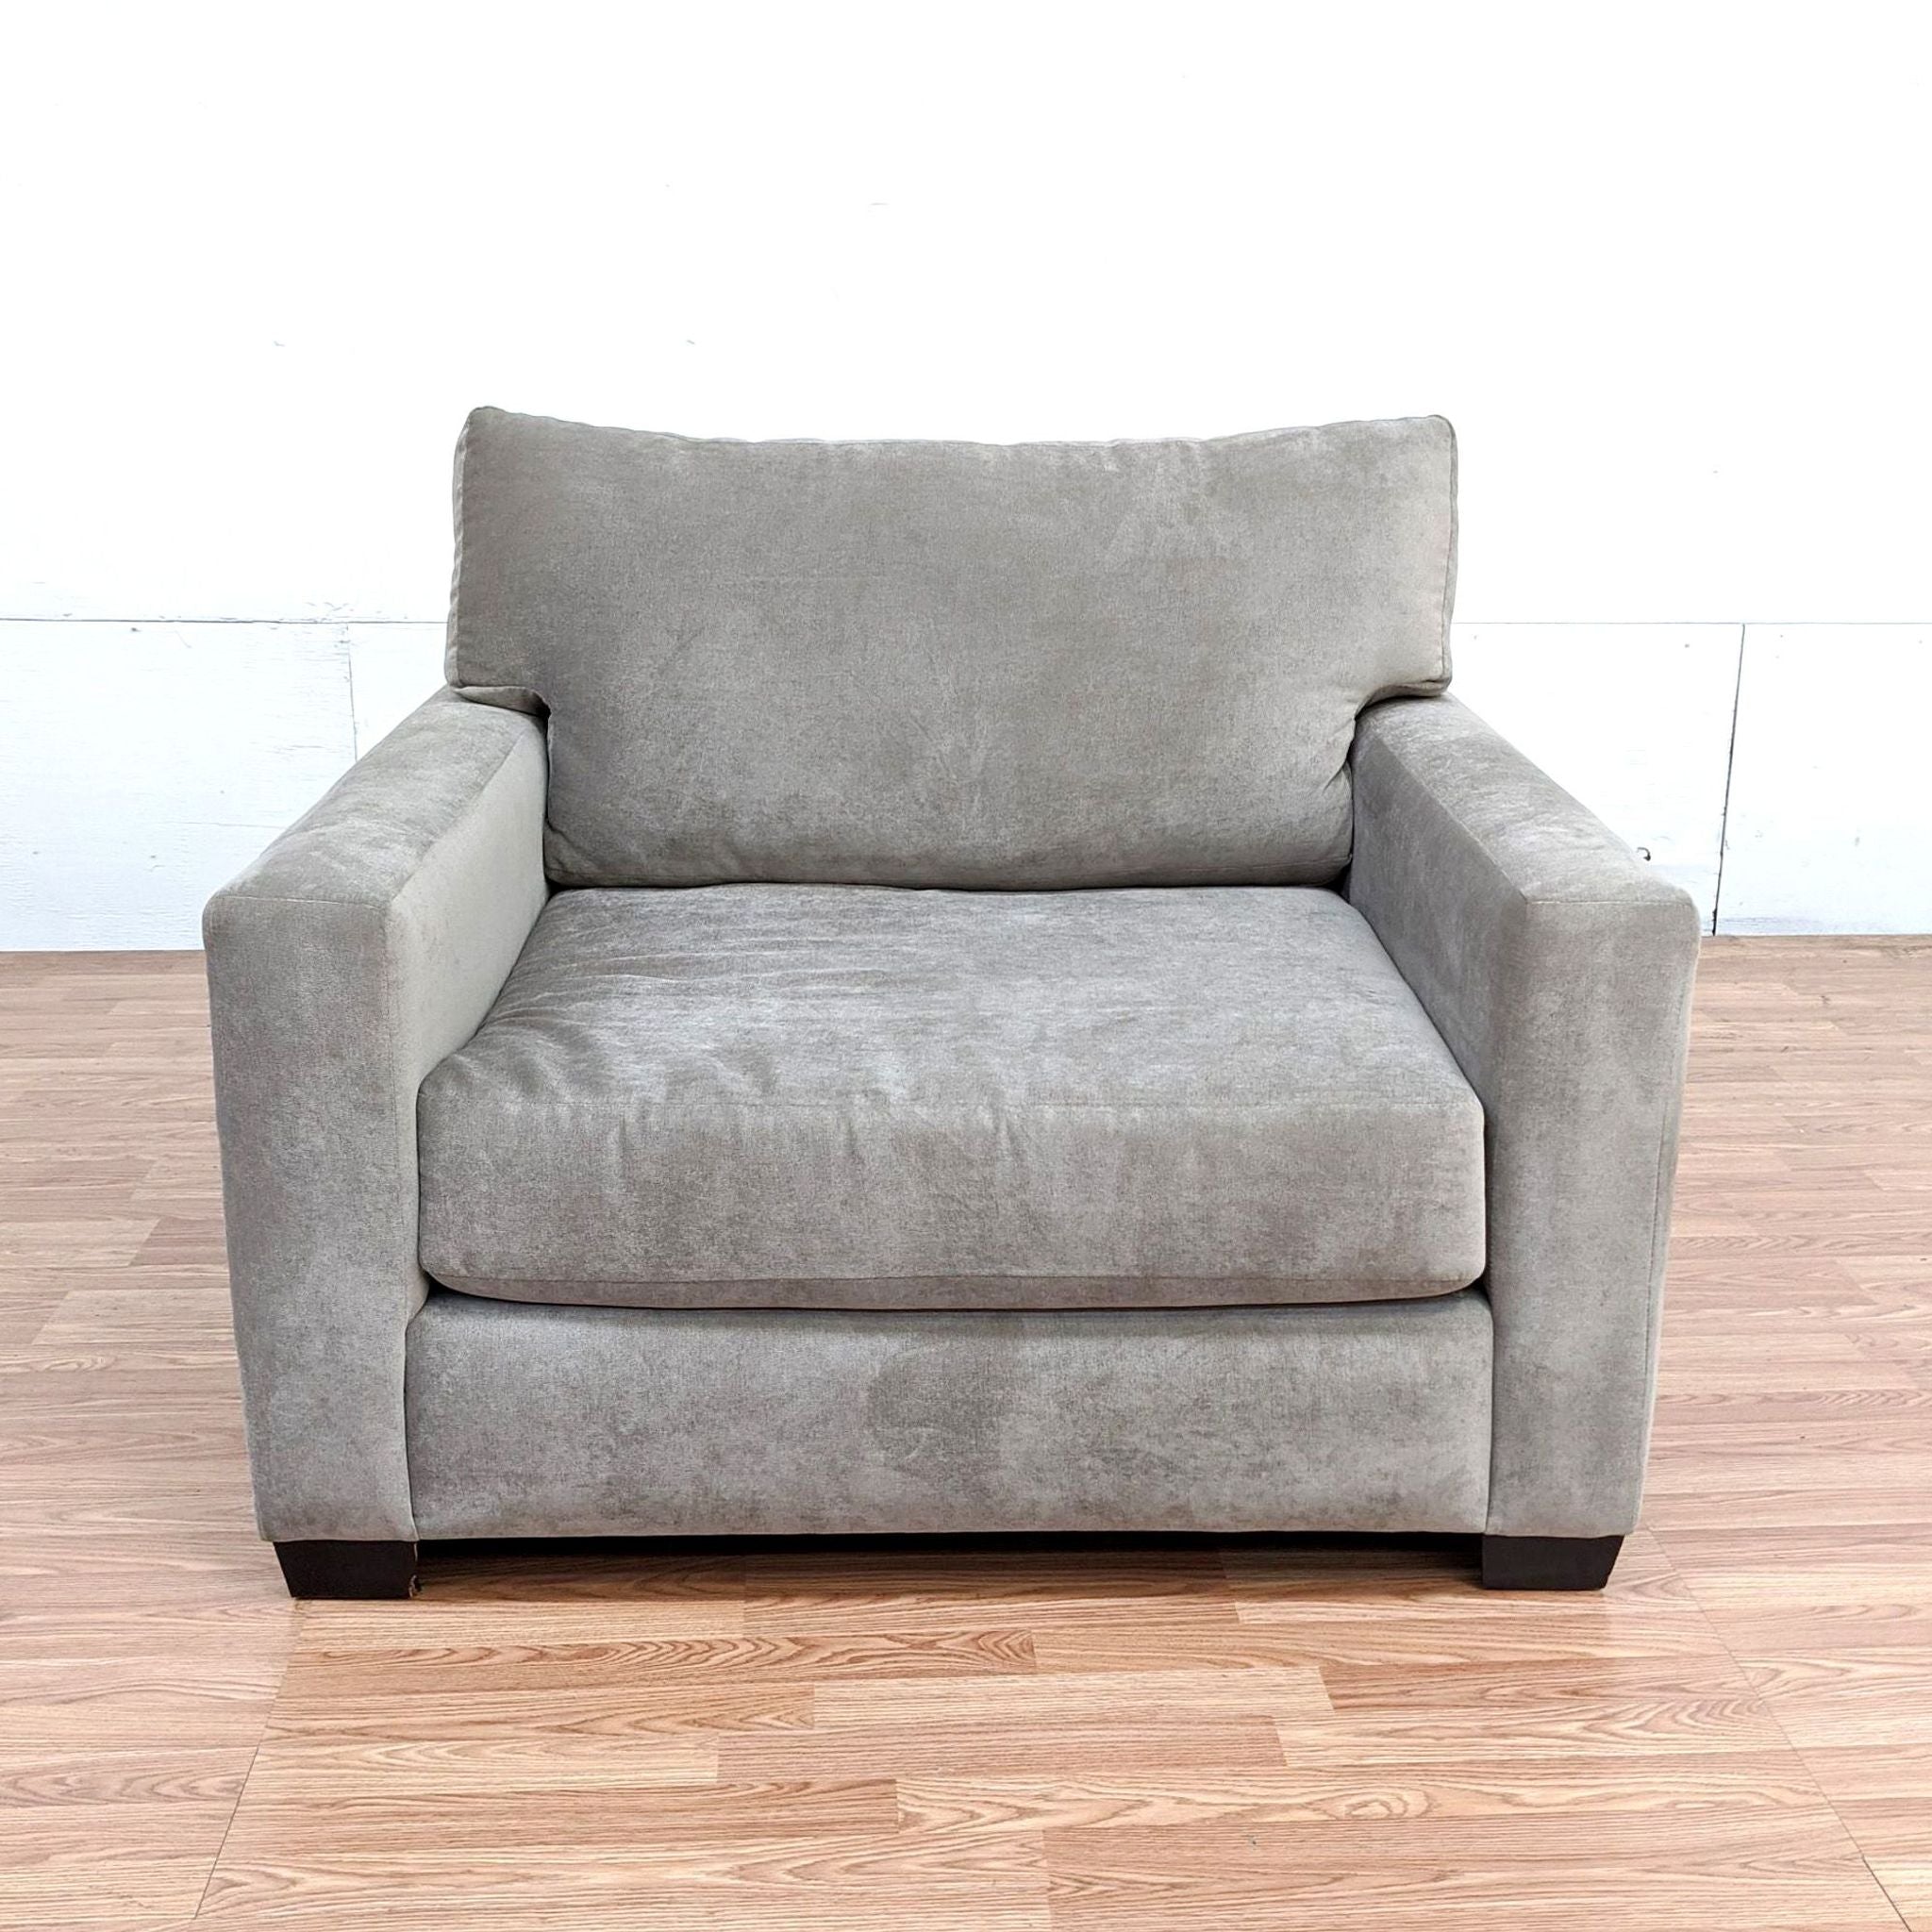 Front view of a Reperch brand lounge armchair in grey with plush cushions.